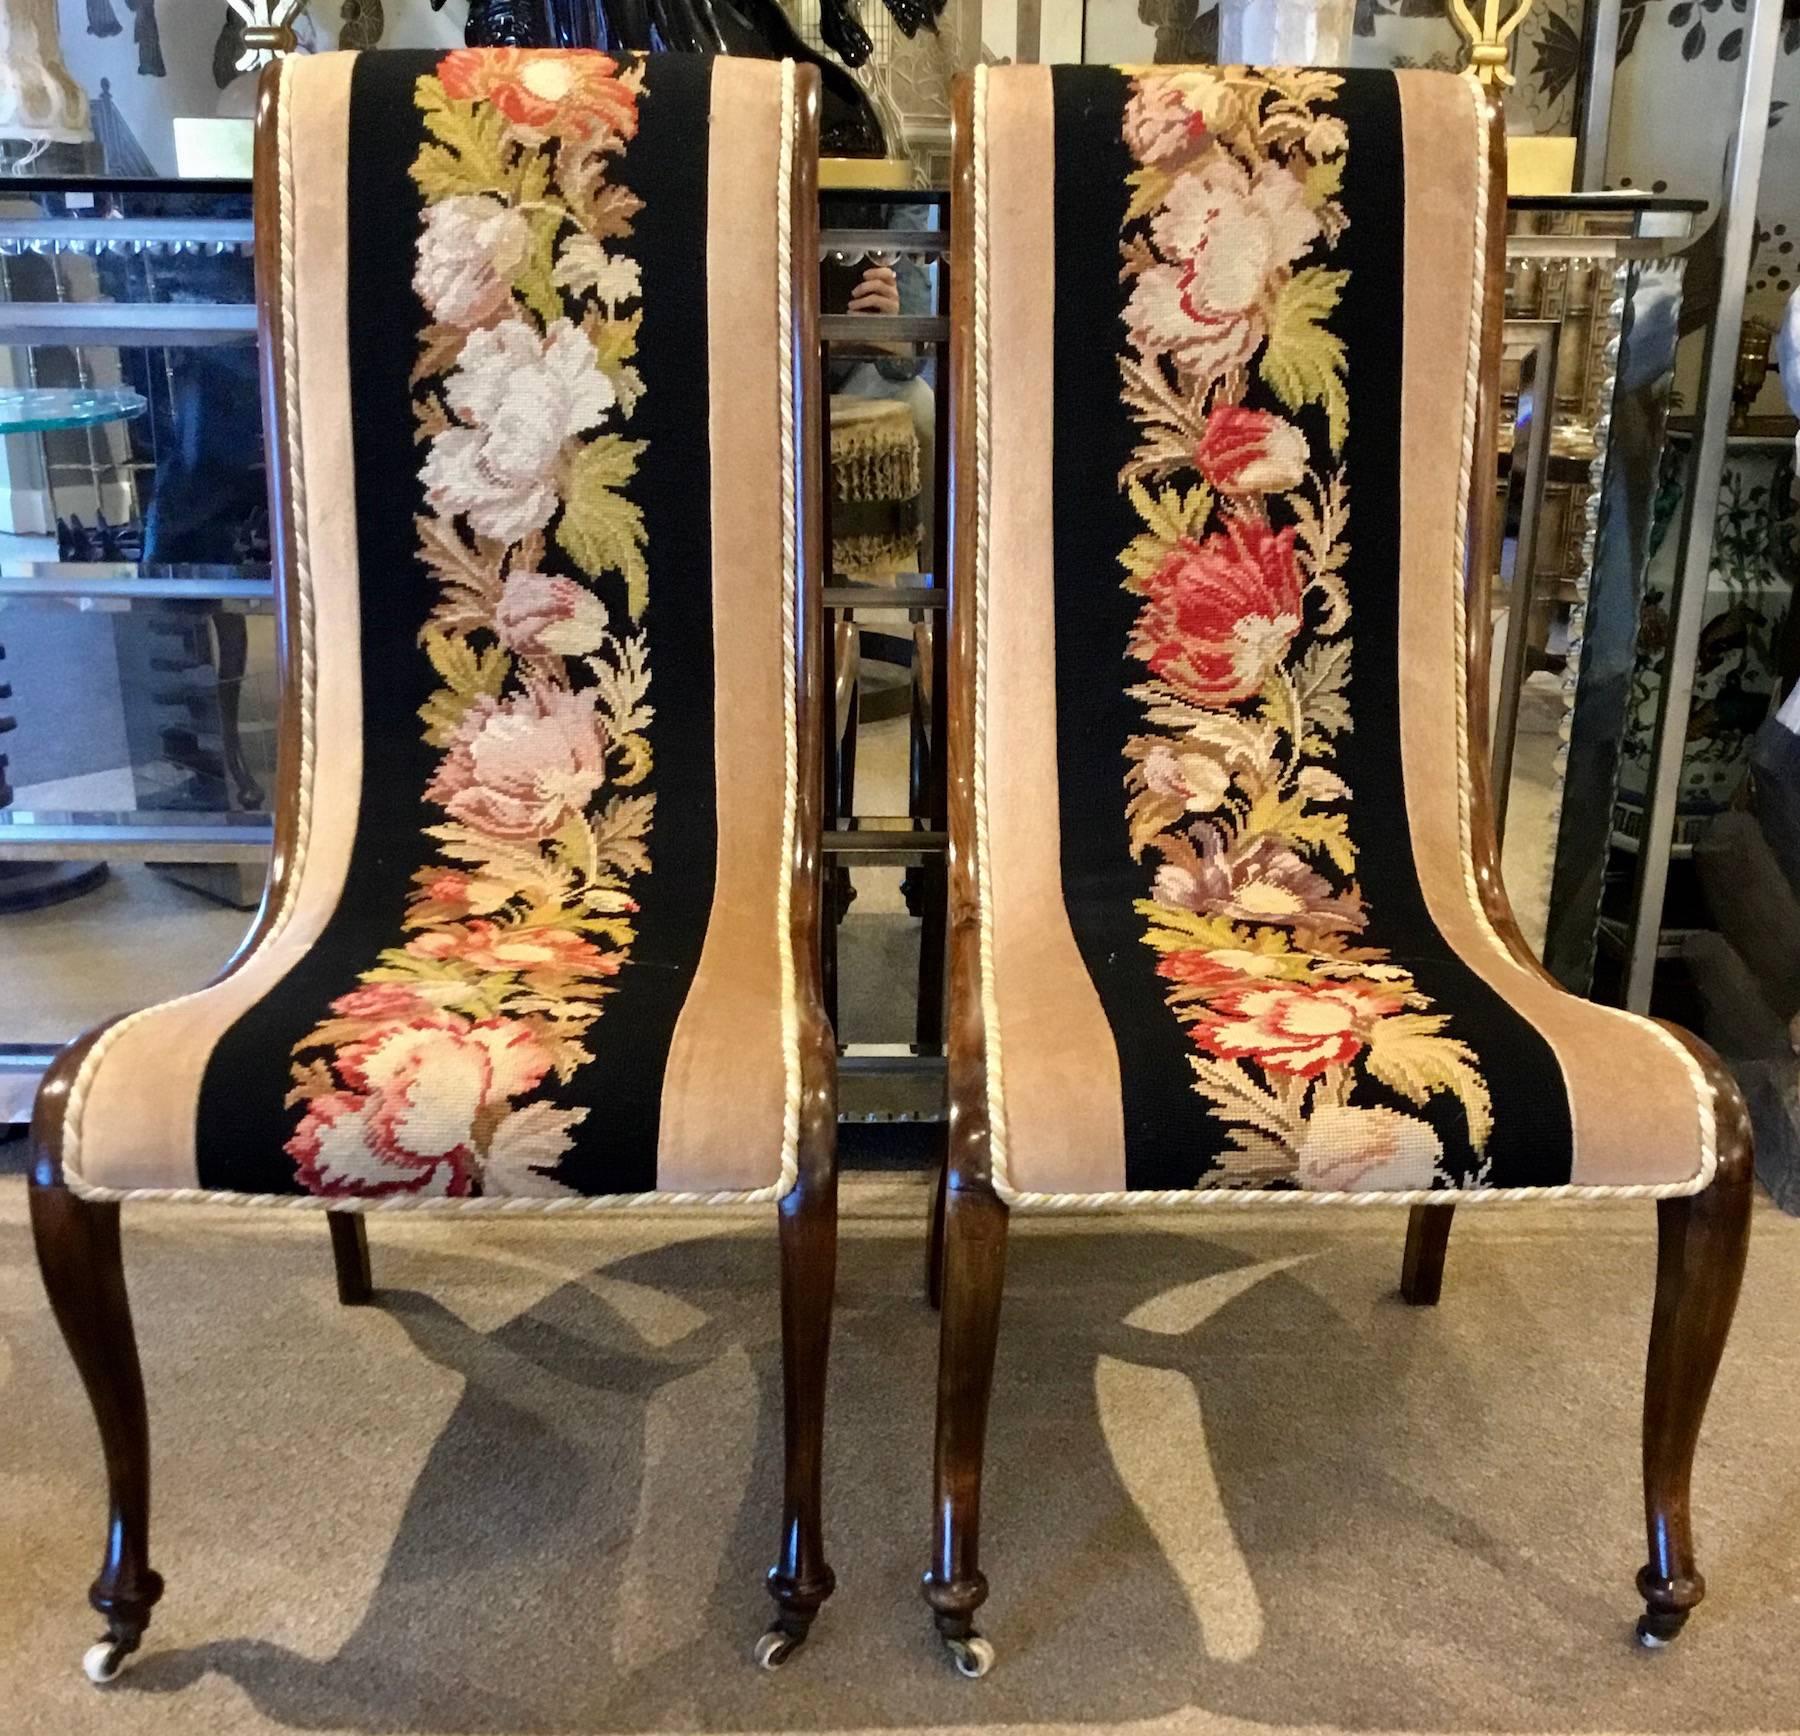 Pair of Napoleon III needlepoint slipper chairs, each one with a sleek walnut frame, with exquisite bold and vibrant floral needlework. Sturdy, functional and comfortable chairs.